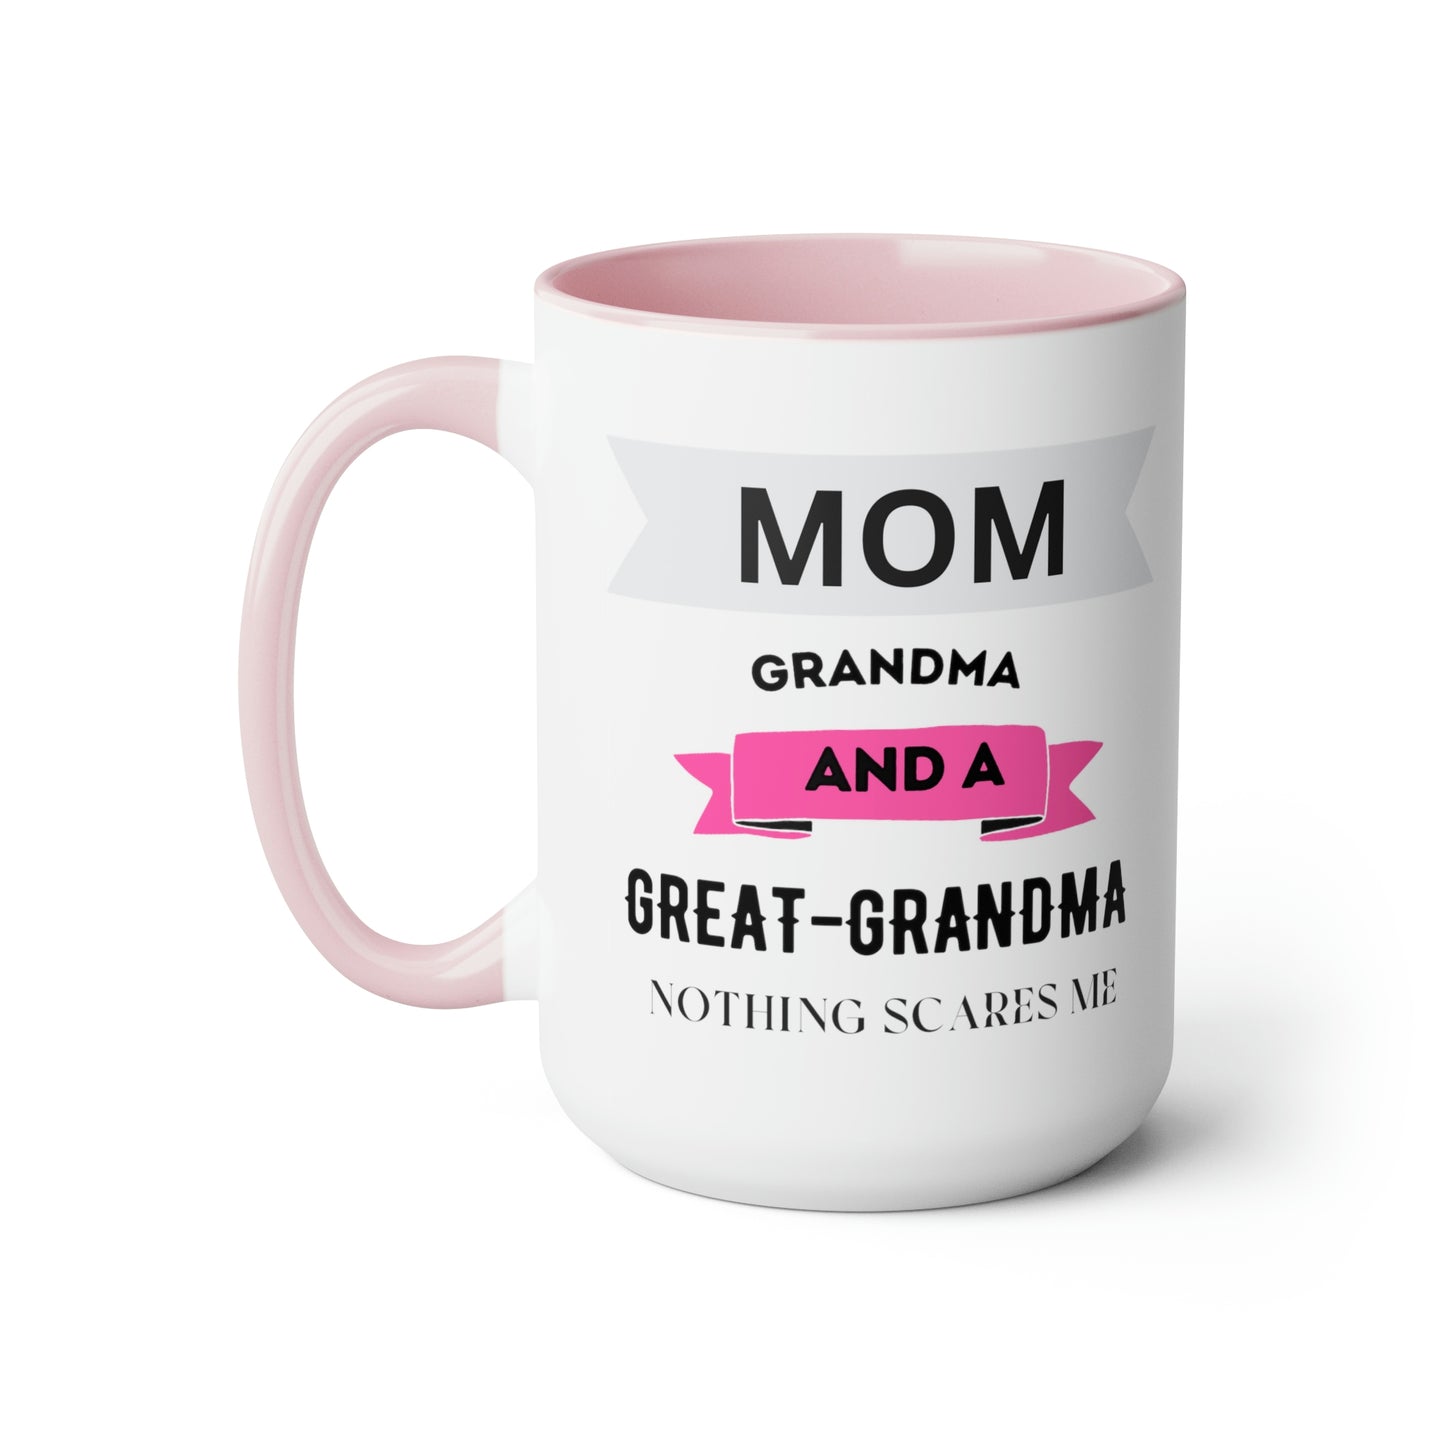 I am a Mom, Grandma and Great Grandma and Nothing Scares Me